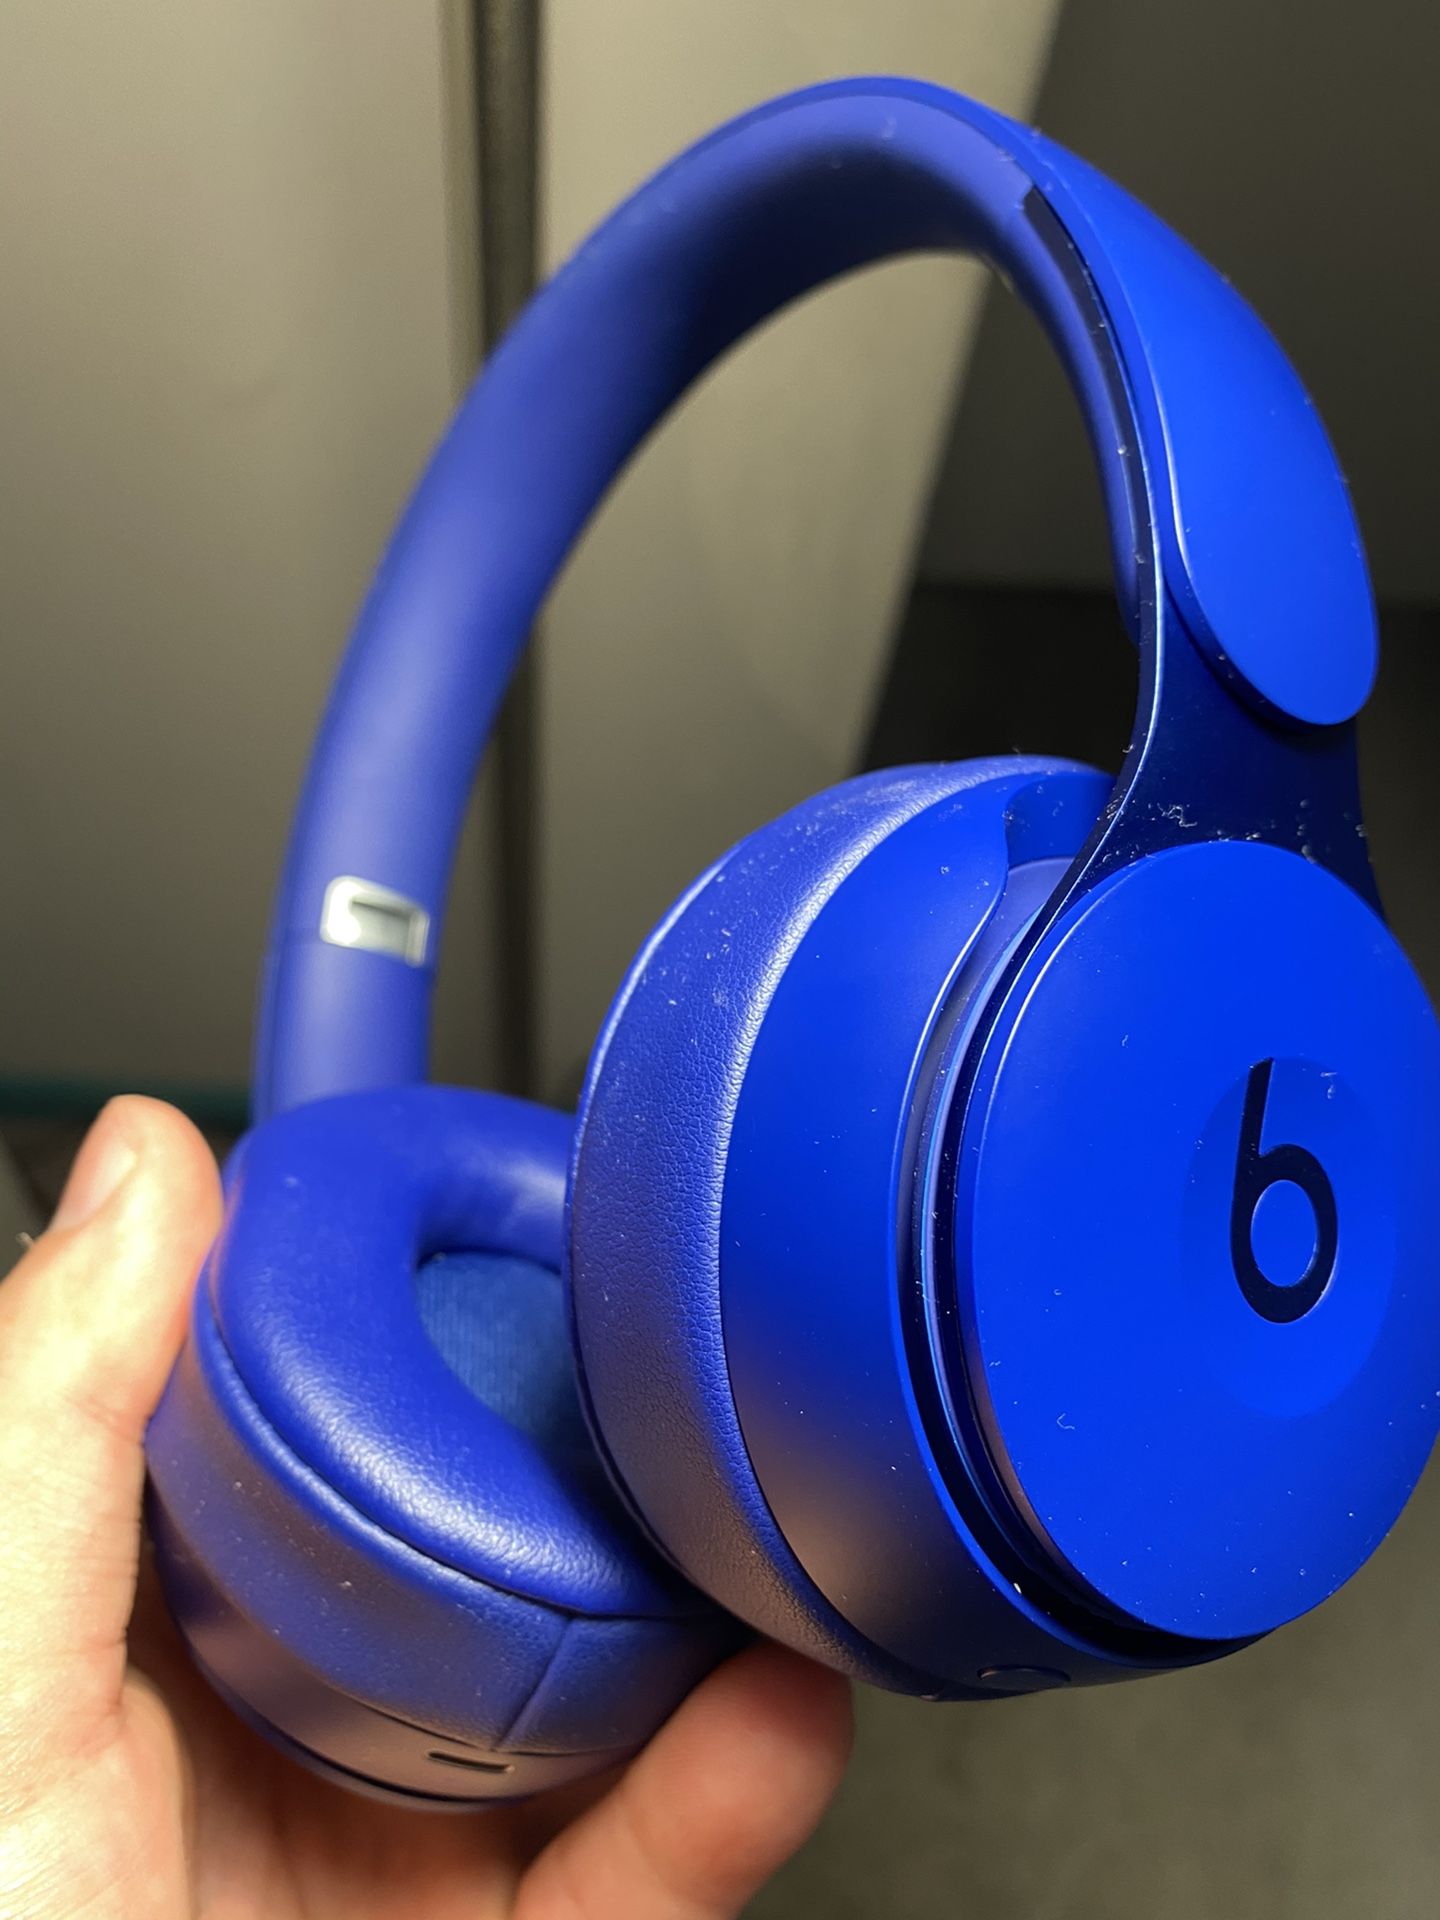 Beats Solo Pro Wireless Noise Cancelling On-Ear Headphones - Apple H1 Headphone Chip, Class 1 Bluetooth, Active Noise Cancelling, Transparency, 22 Ho